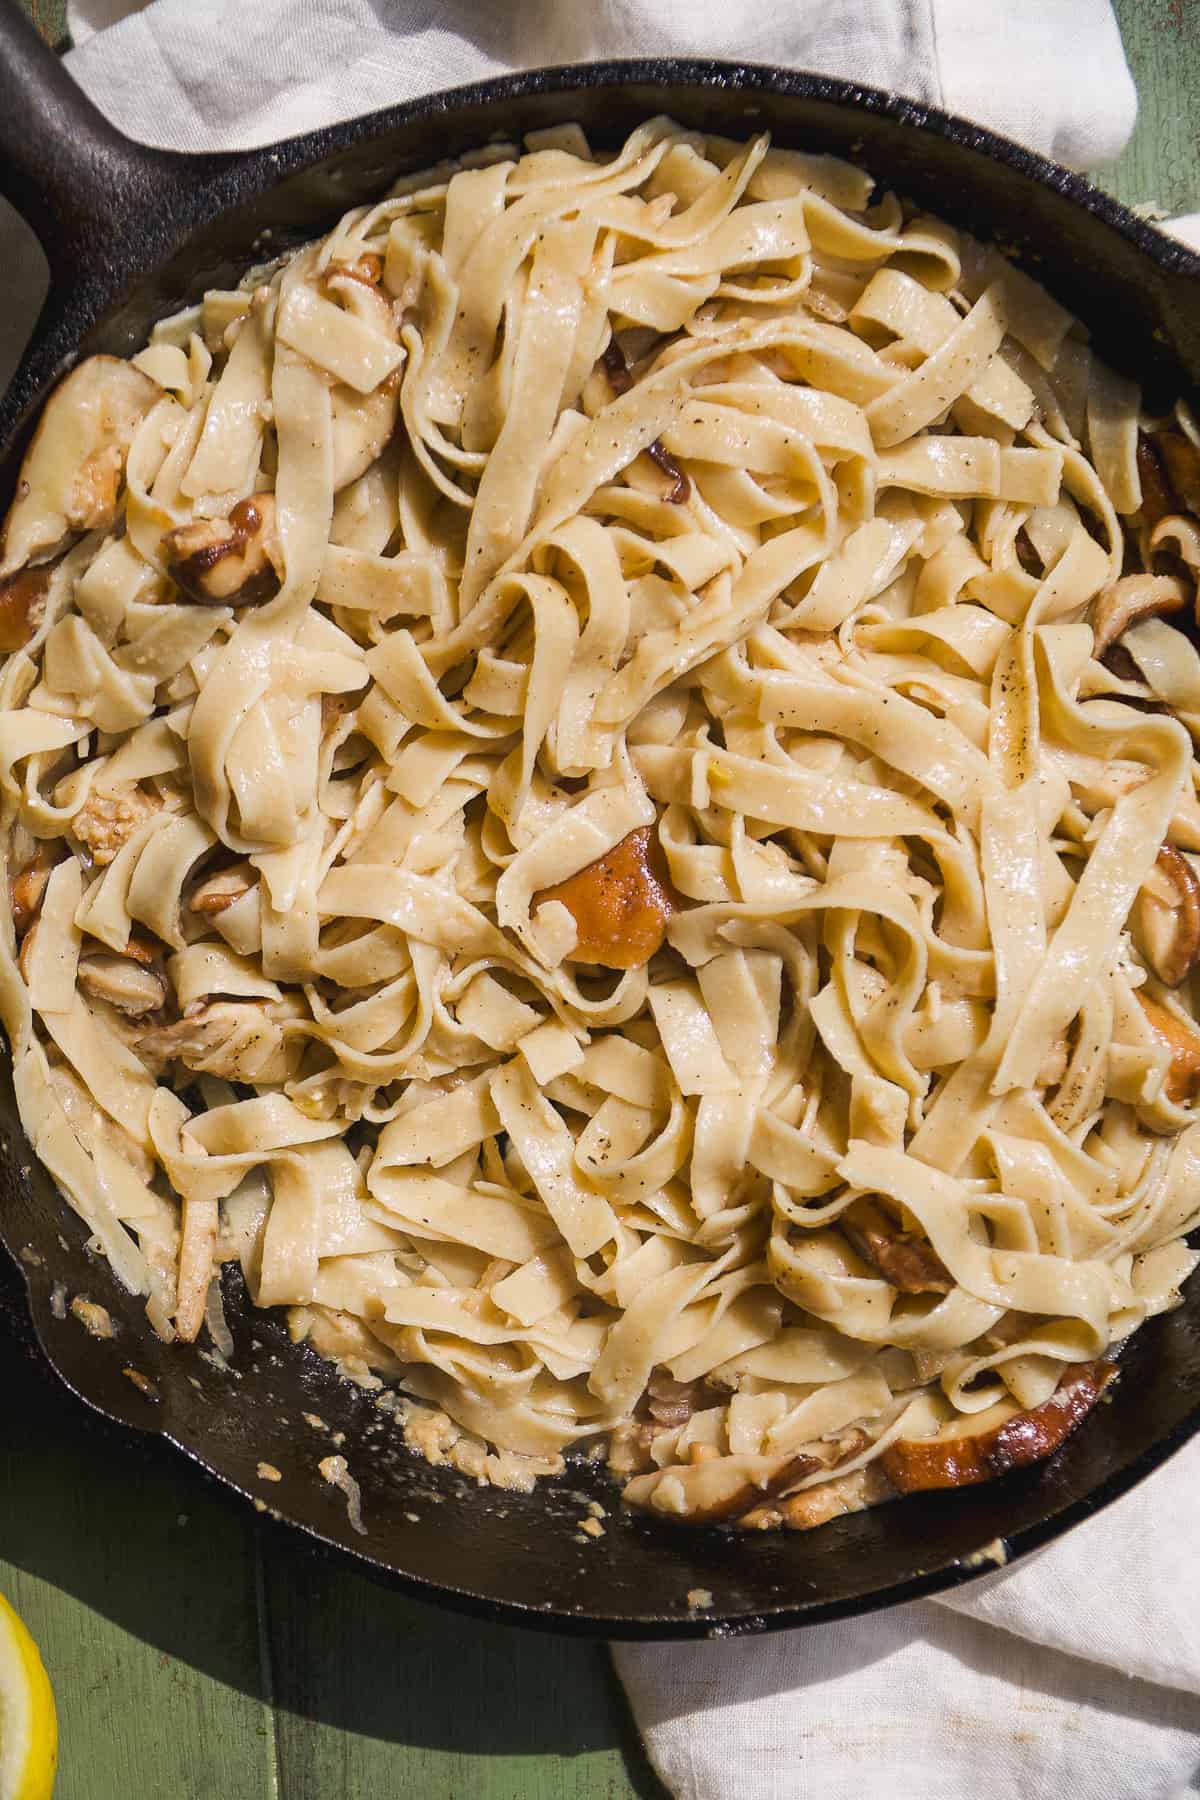 Truffle pasta cooking in a cast iron skillet.